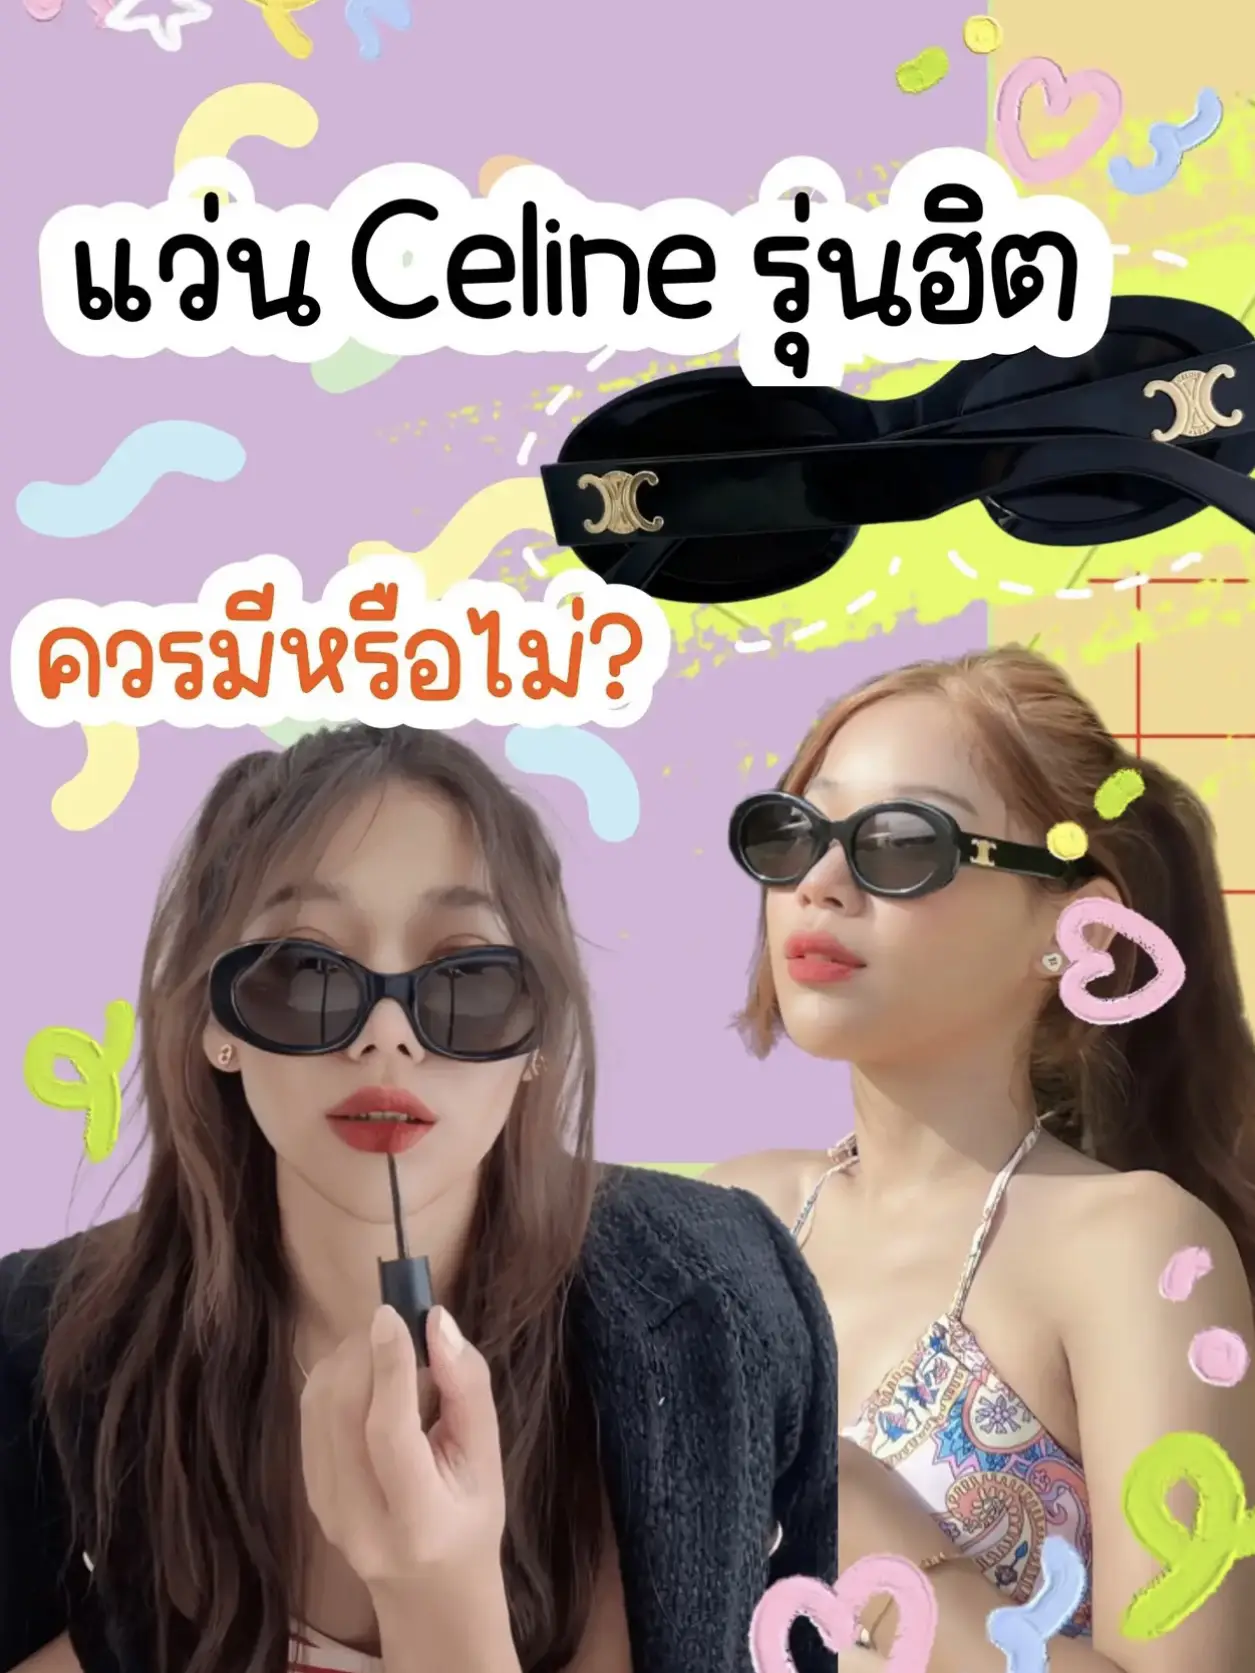 Should Celine Sunglasses Part?! | Gallery posted by Sinderstory